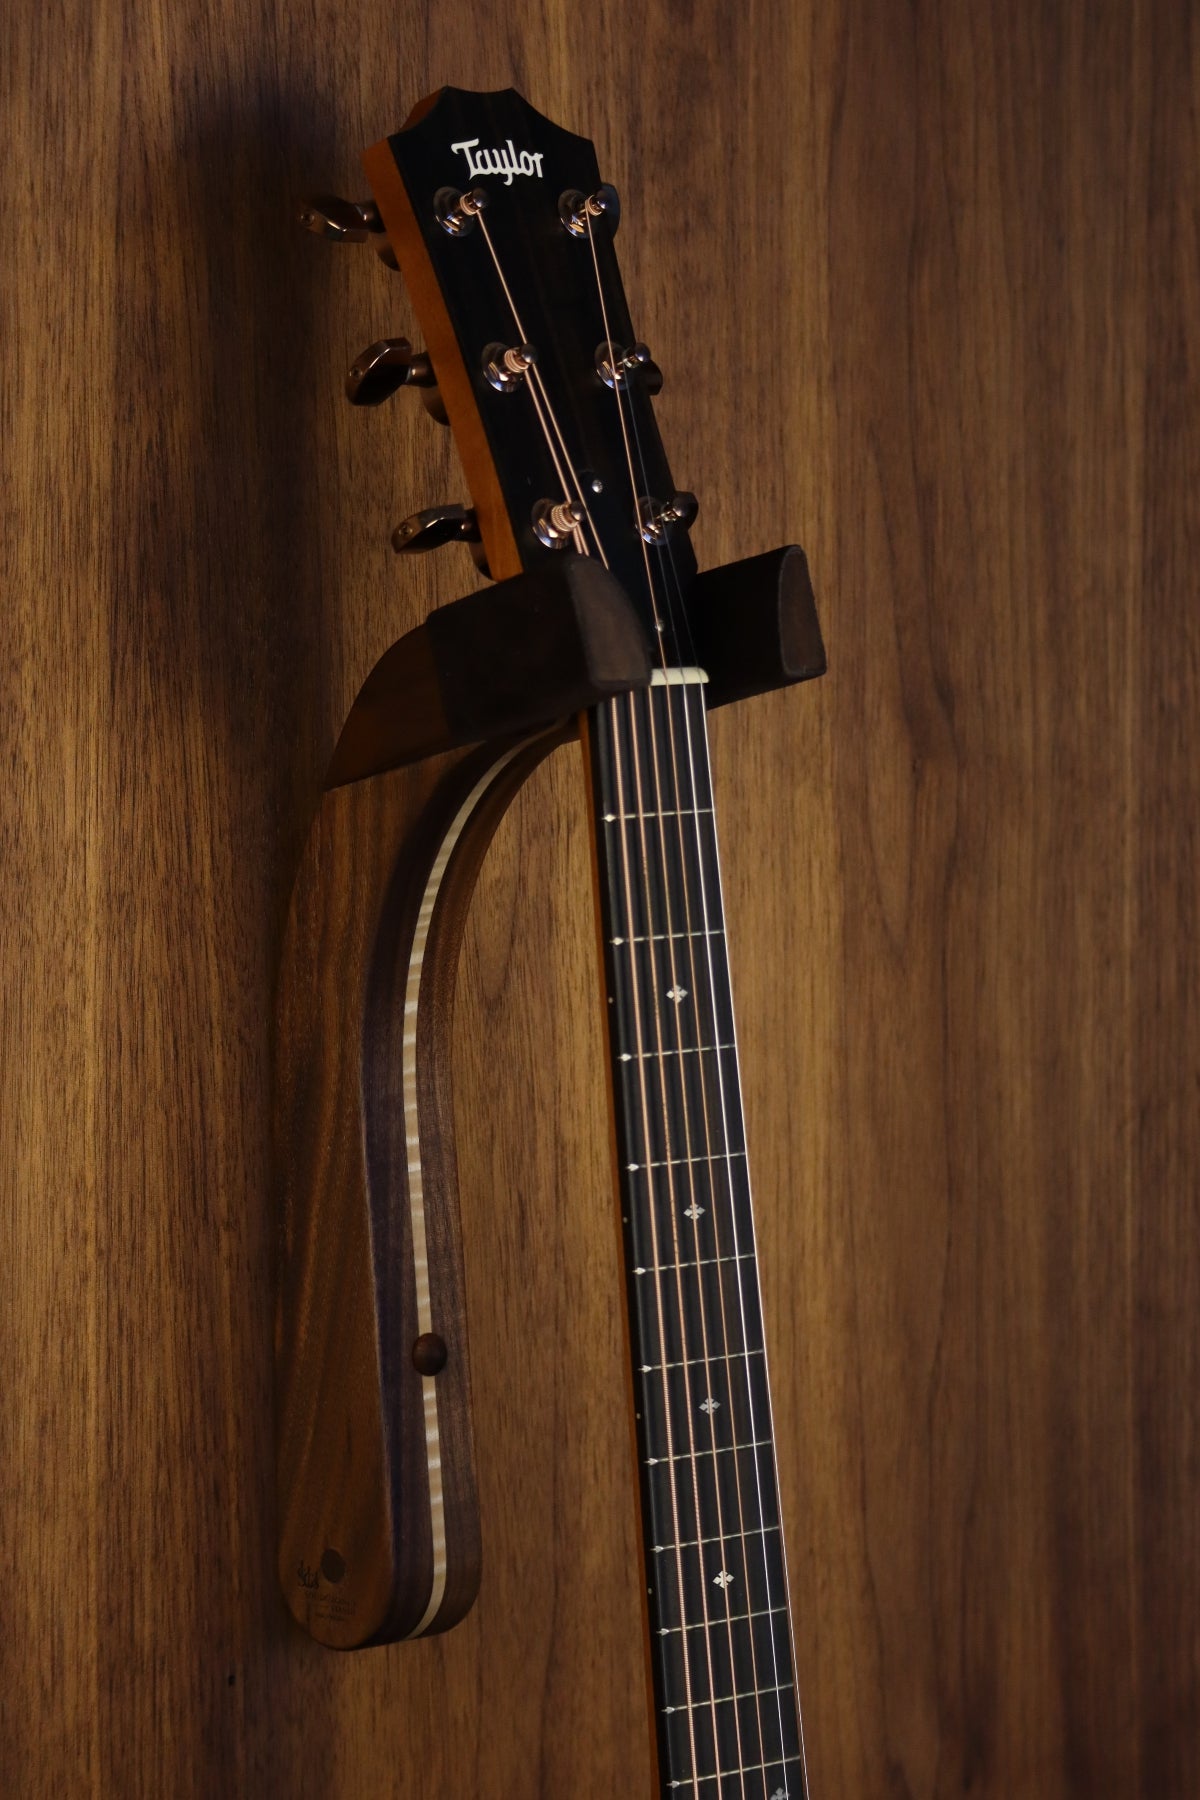 Walnut and curly maple wood guitar wall mount hanger installed on paneled wall with Taylor guitar